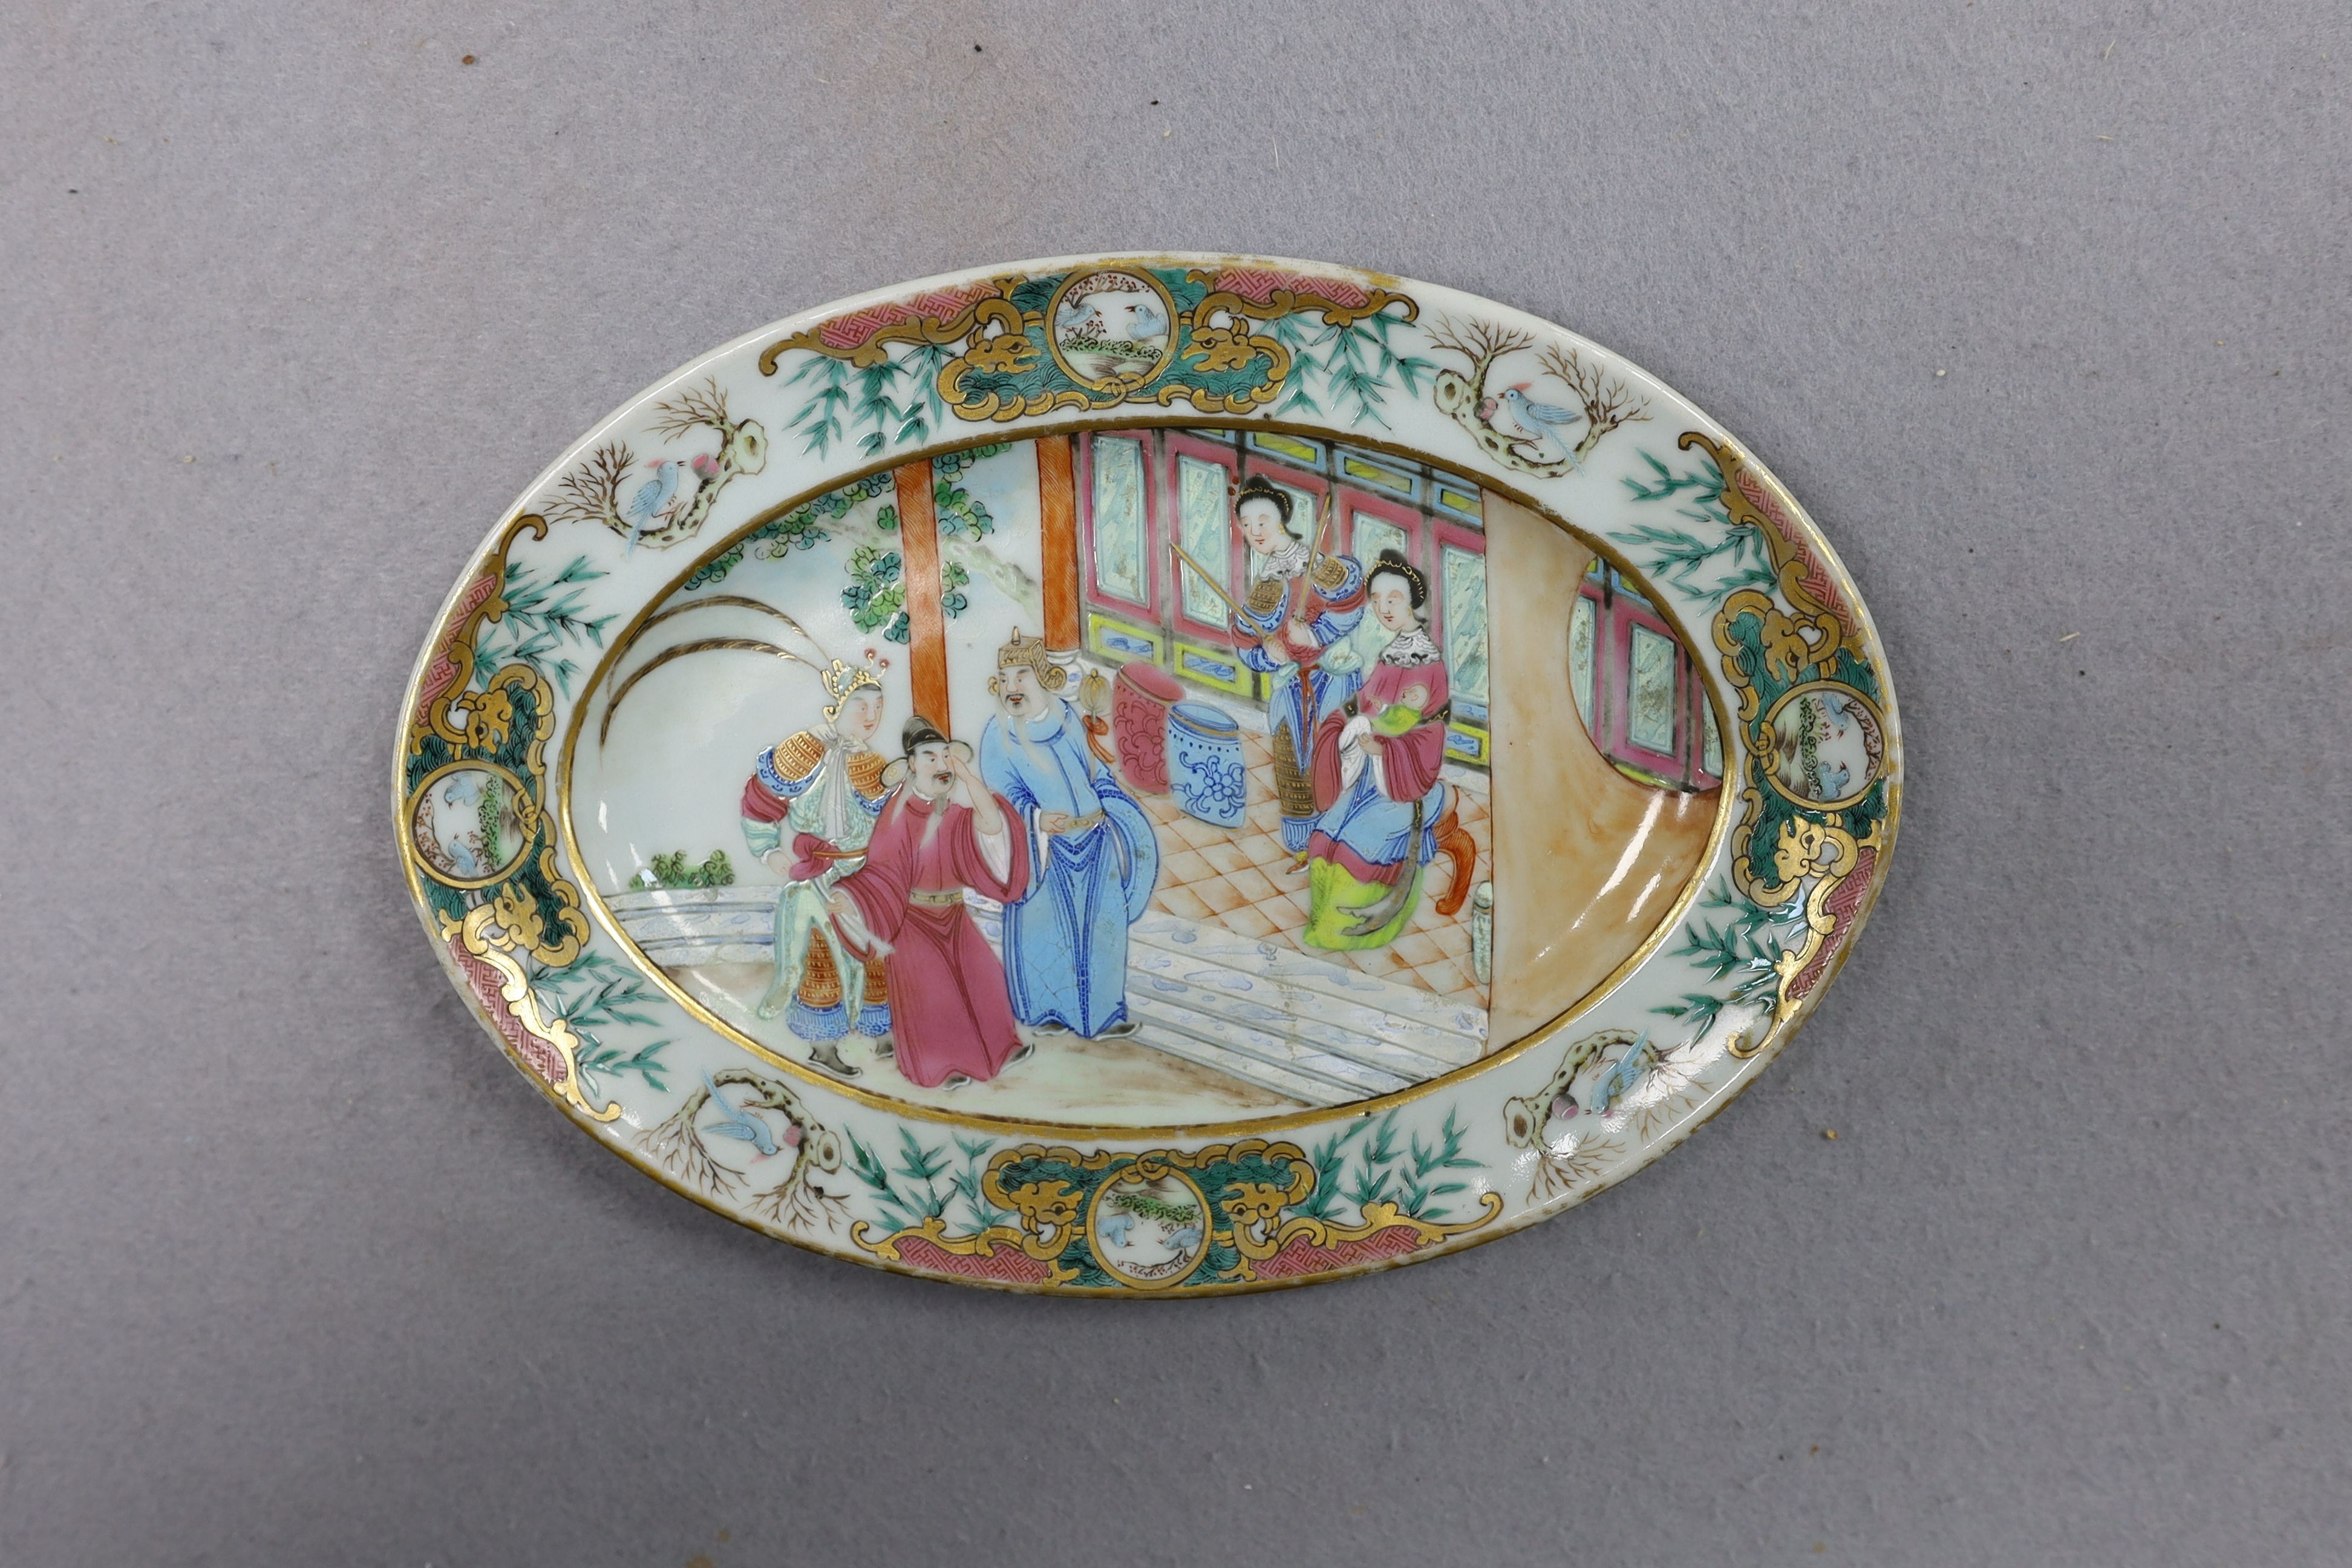 Two fine Chinese famille rose fencai dishes, 19th century, 24cm diameter